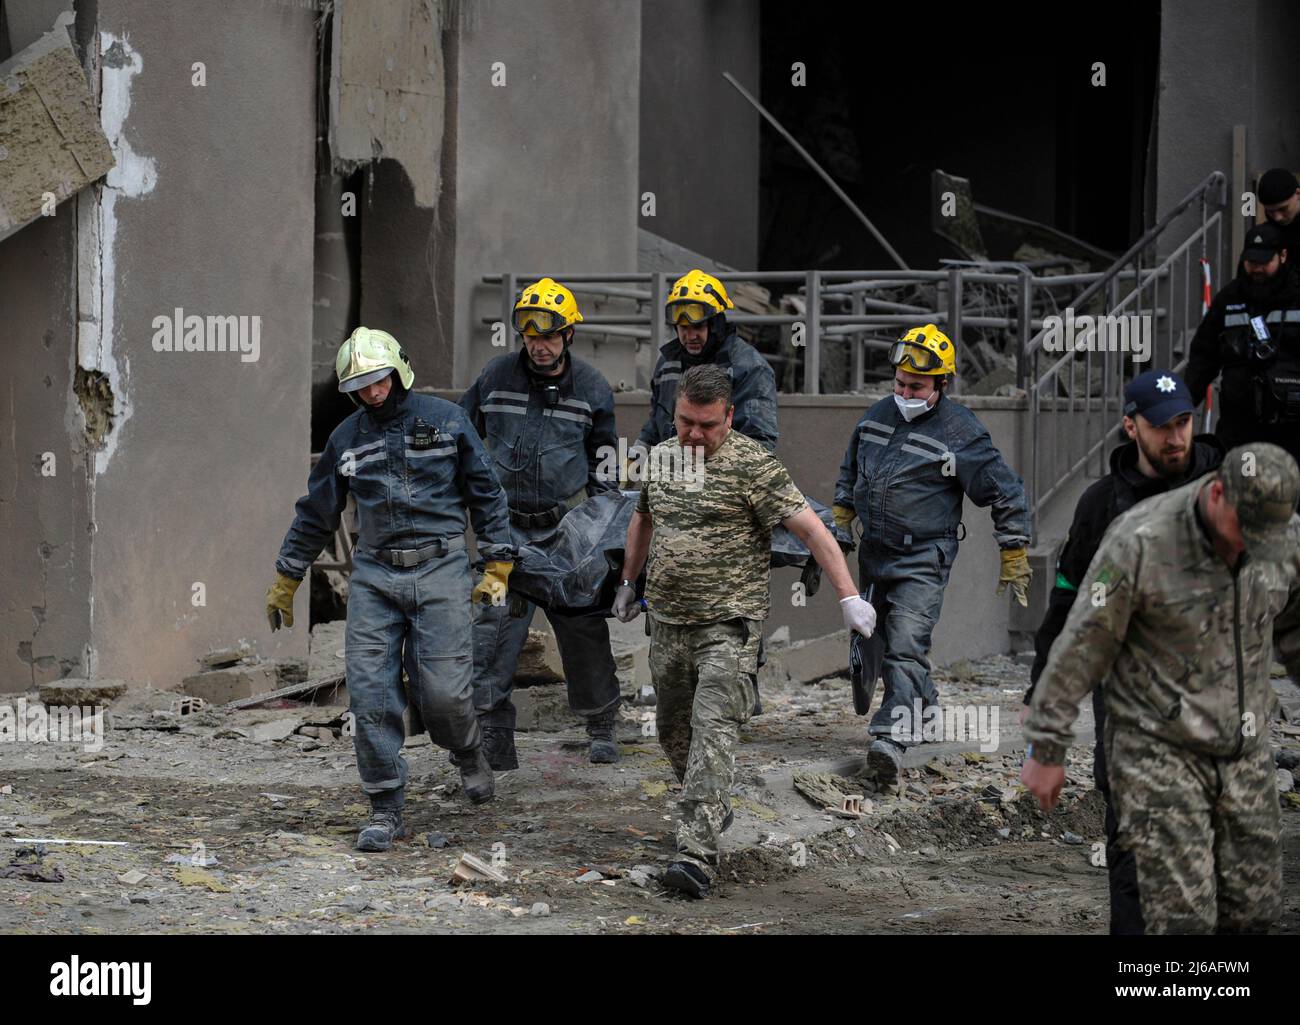 Kyiv, Ukraine. 29th Apr, 2022. April 29, 2022, Kyiv, Ukraine: Rescuers carry the body of a dead woman who died during a Russian army missile strike. On April 28 2022, two Russian missiles hit Kyiv. One of them hit a 25-storey residential building. It was reported about 10 victims, of which four were hospitalized and on the next day, the mayor of Kyiv, Vitali Klitschko, said that as a result of a Russian missile hitting a high-rise building, one person died. At that moment, UN Secretary General AntÃ³nio Guterres was in the capital of Ukraine, holding talks with President Volodymyr Zelensky. (Cr Stock Photo